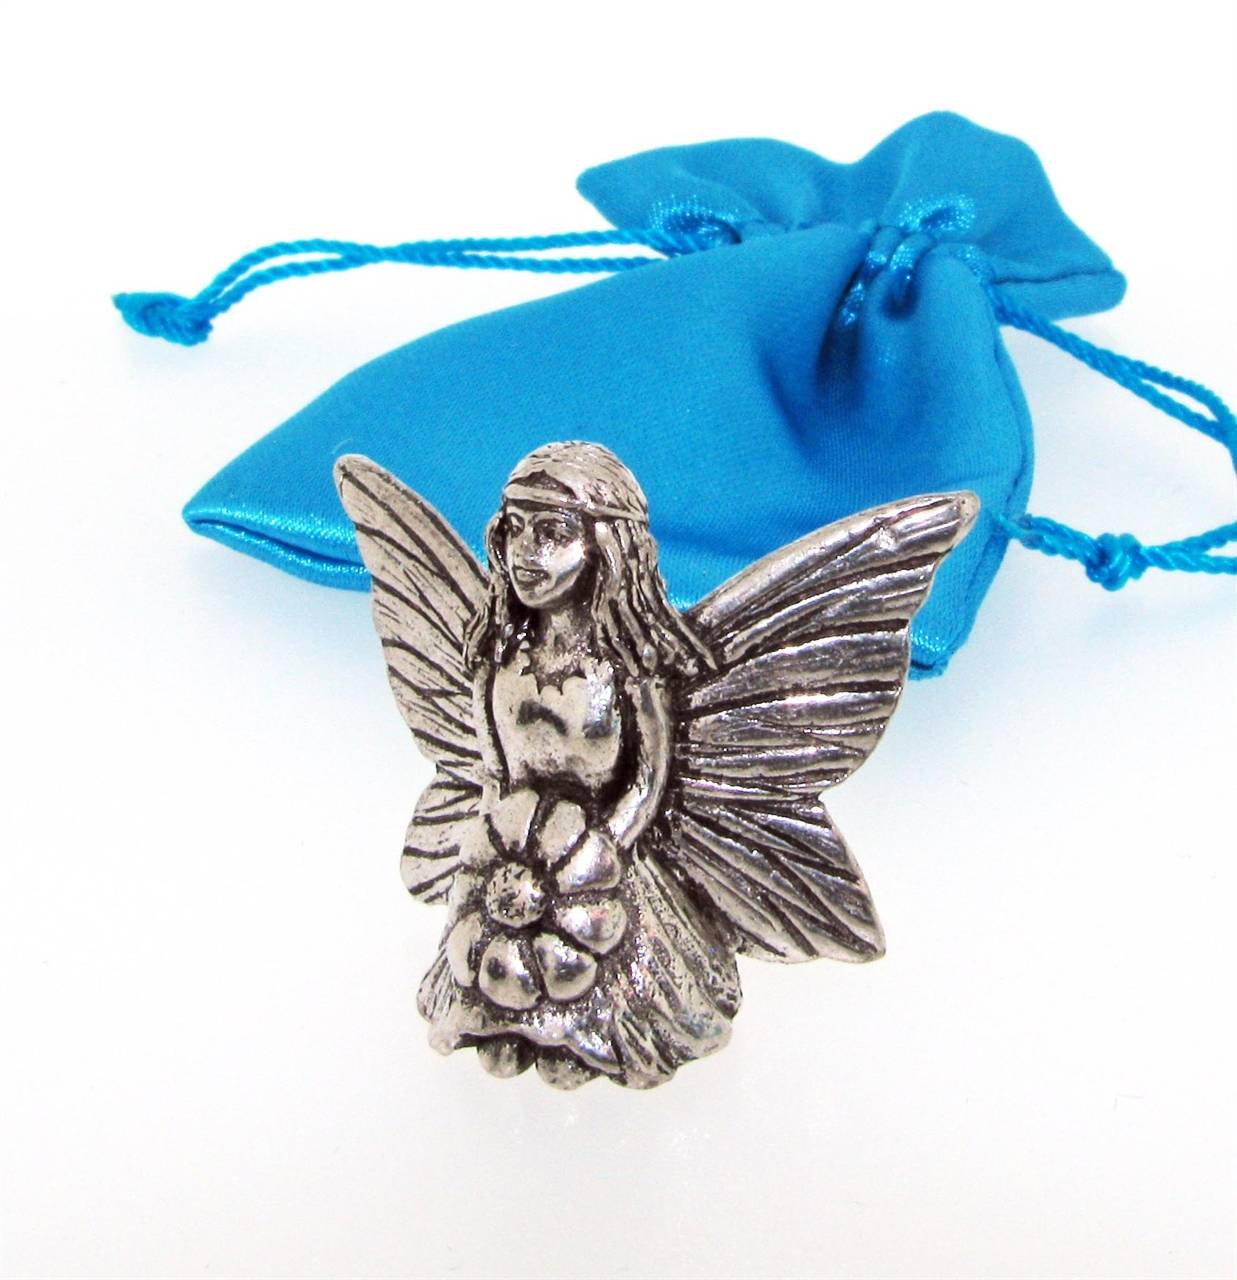 Larger Fairy Miniature - high quality pewter gifts from Pageant Pewter